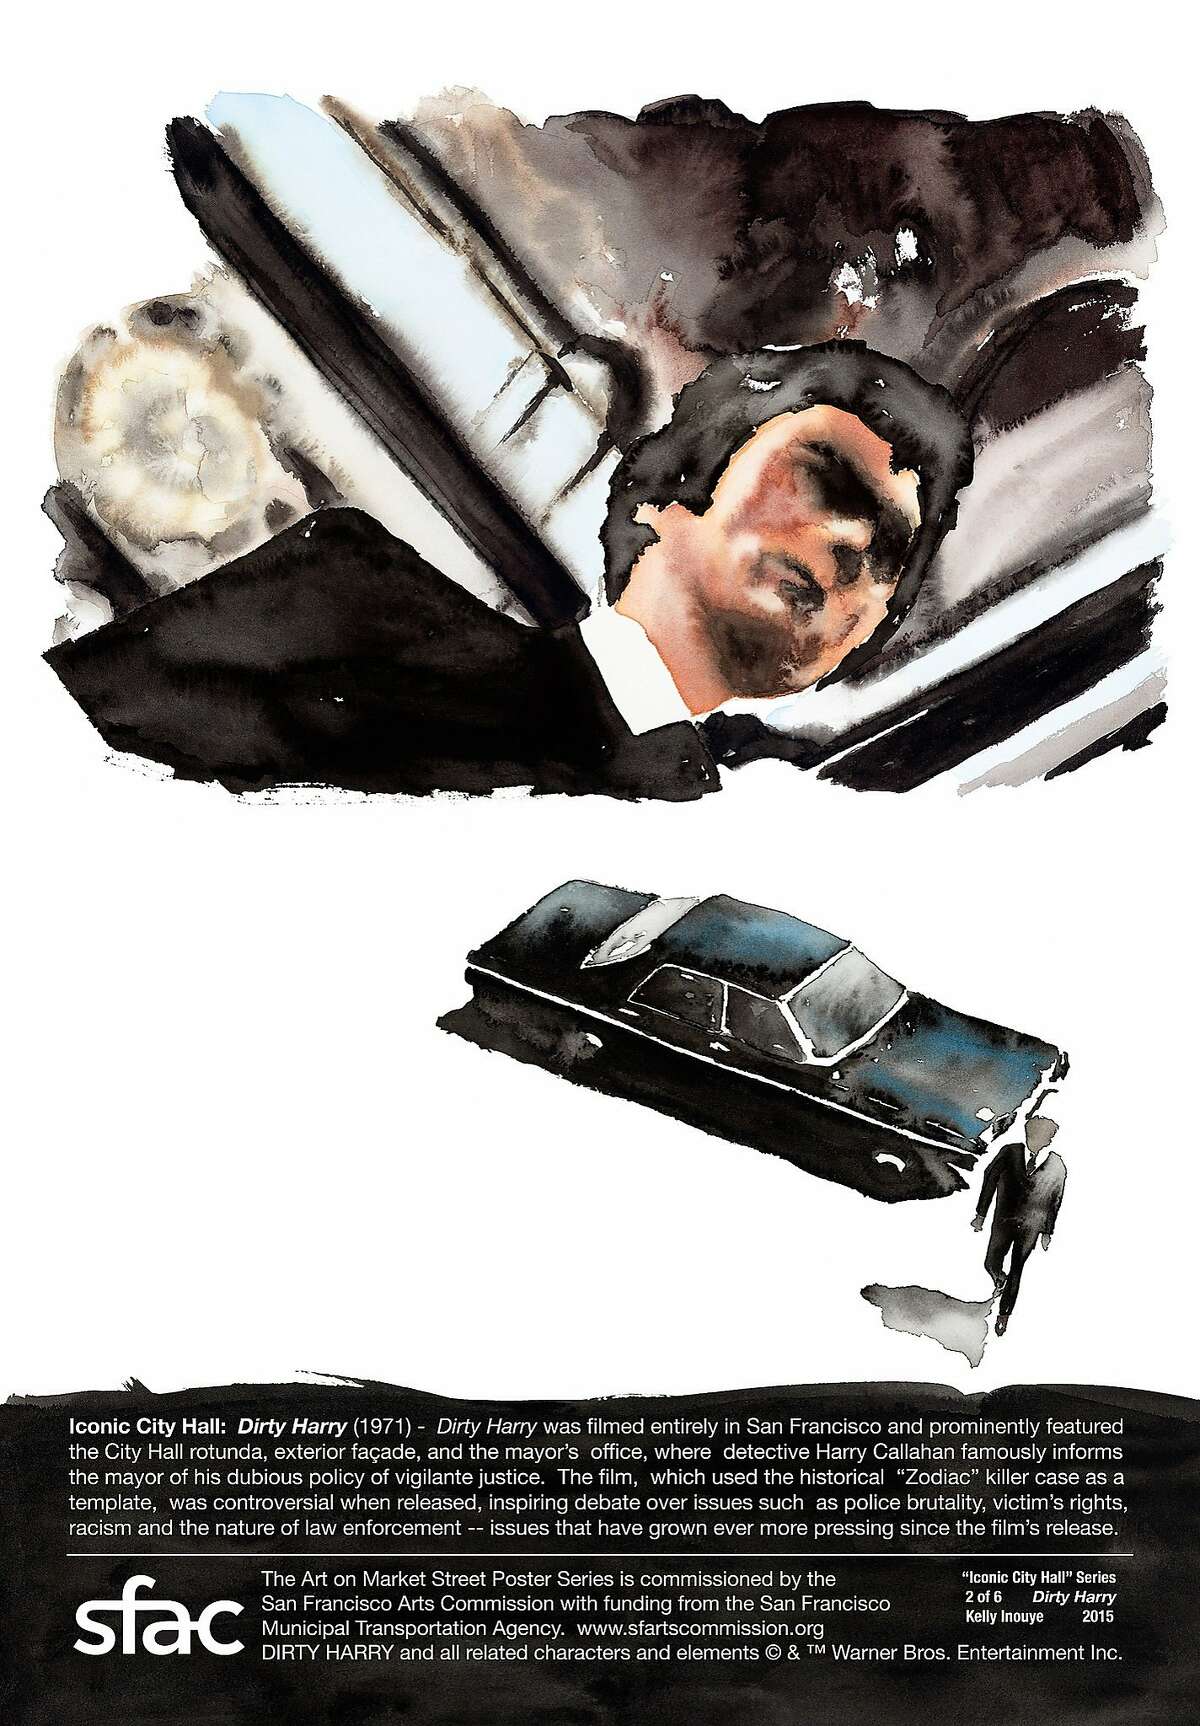 Artist Kelly Inouye's watercolor image from the 1971 film "Dirty Harry" is part of her Market Street poster series celebrating the 100th anniversary of San Francisco City Hall. Credit: Courtesy San Francisco Arts Commission